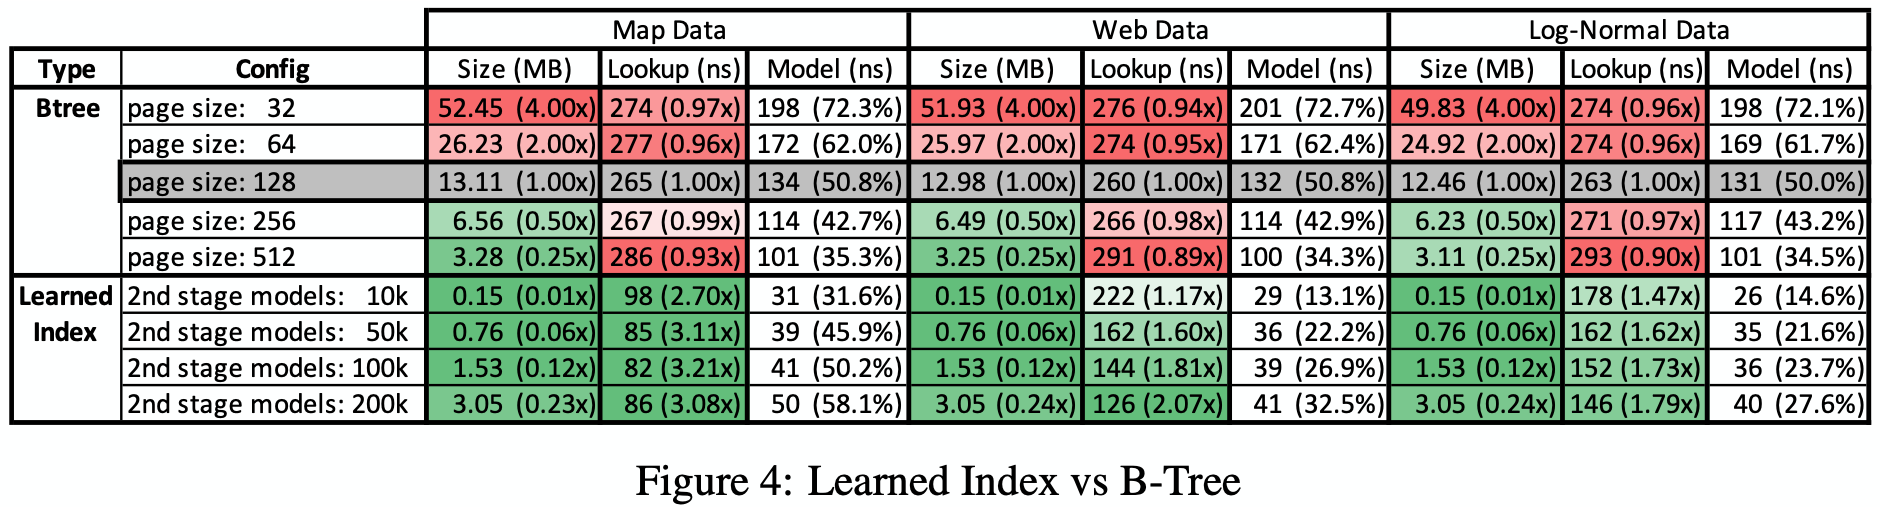 4-learned-index-vs-btree